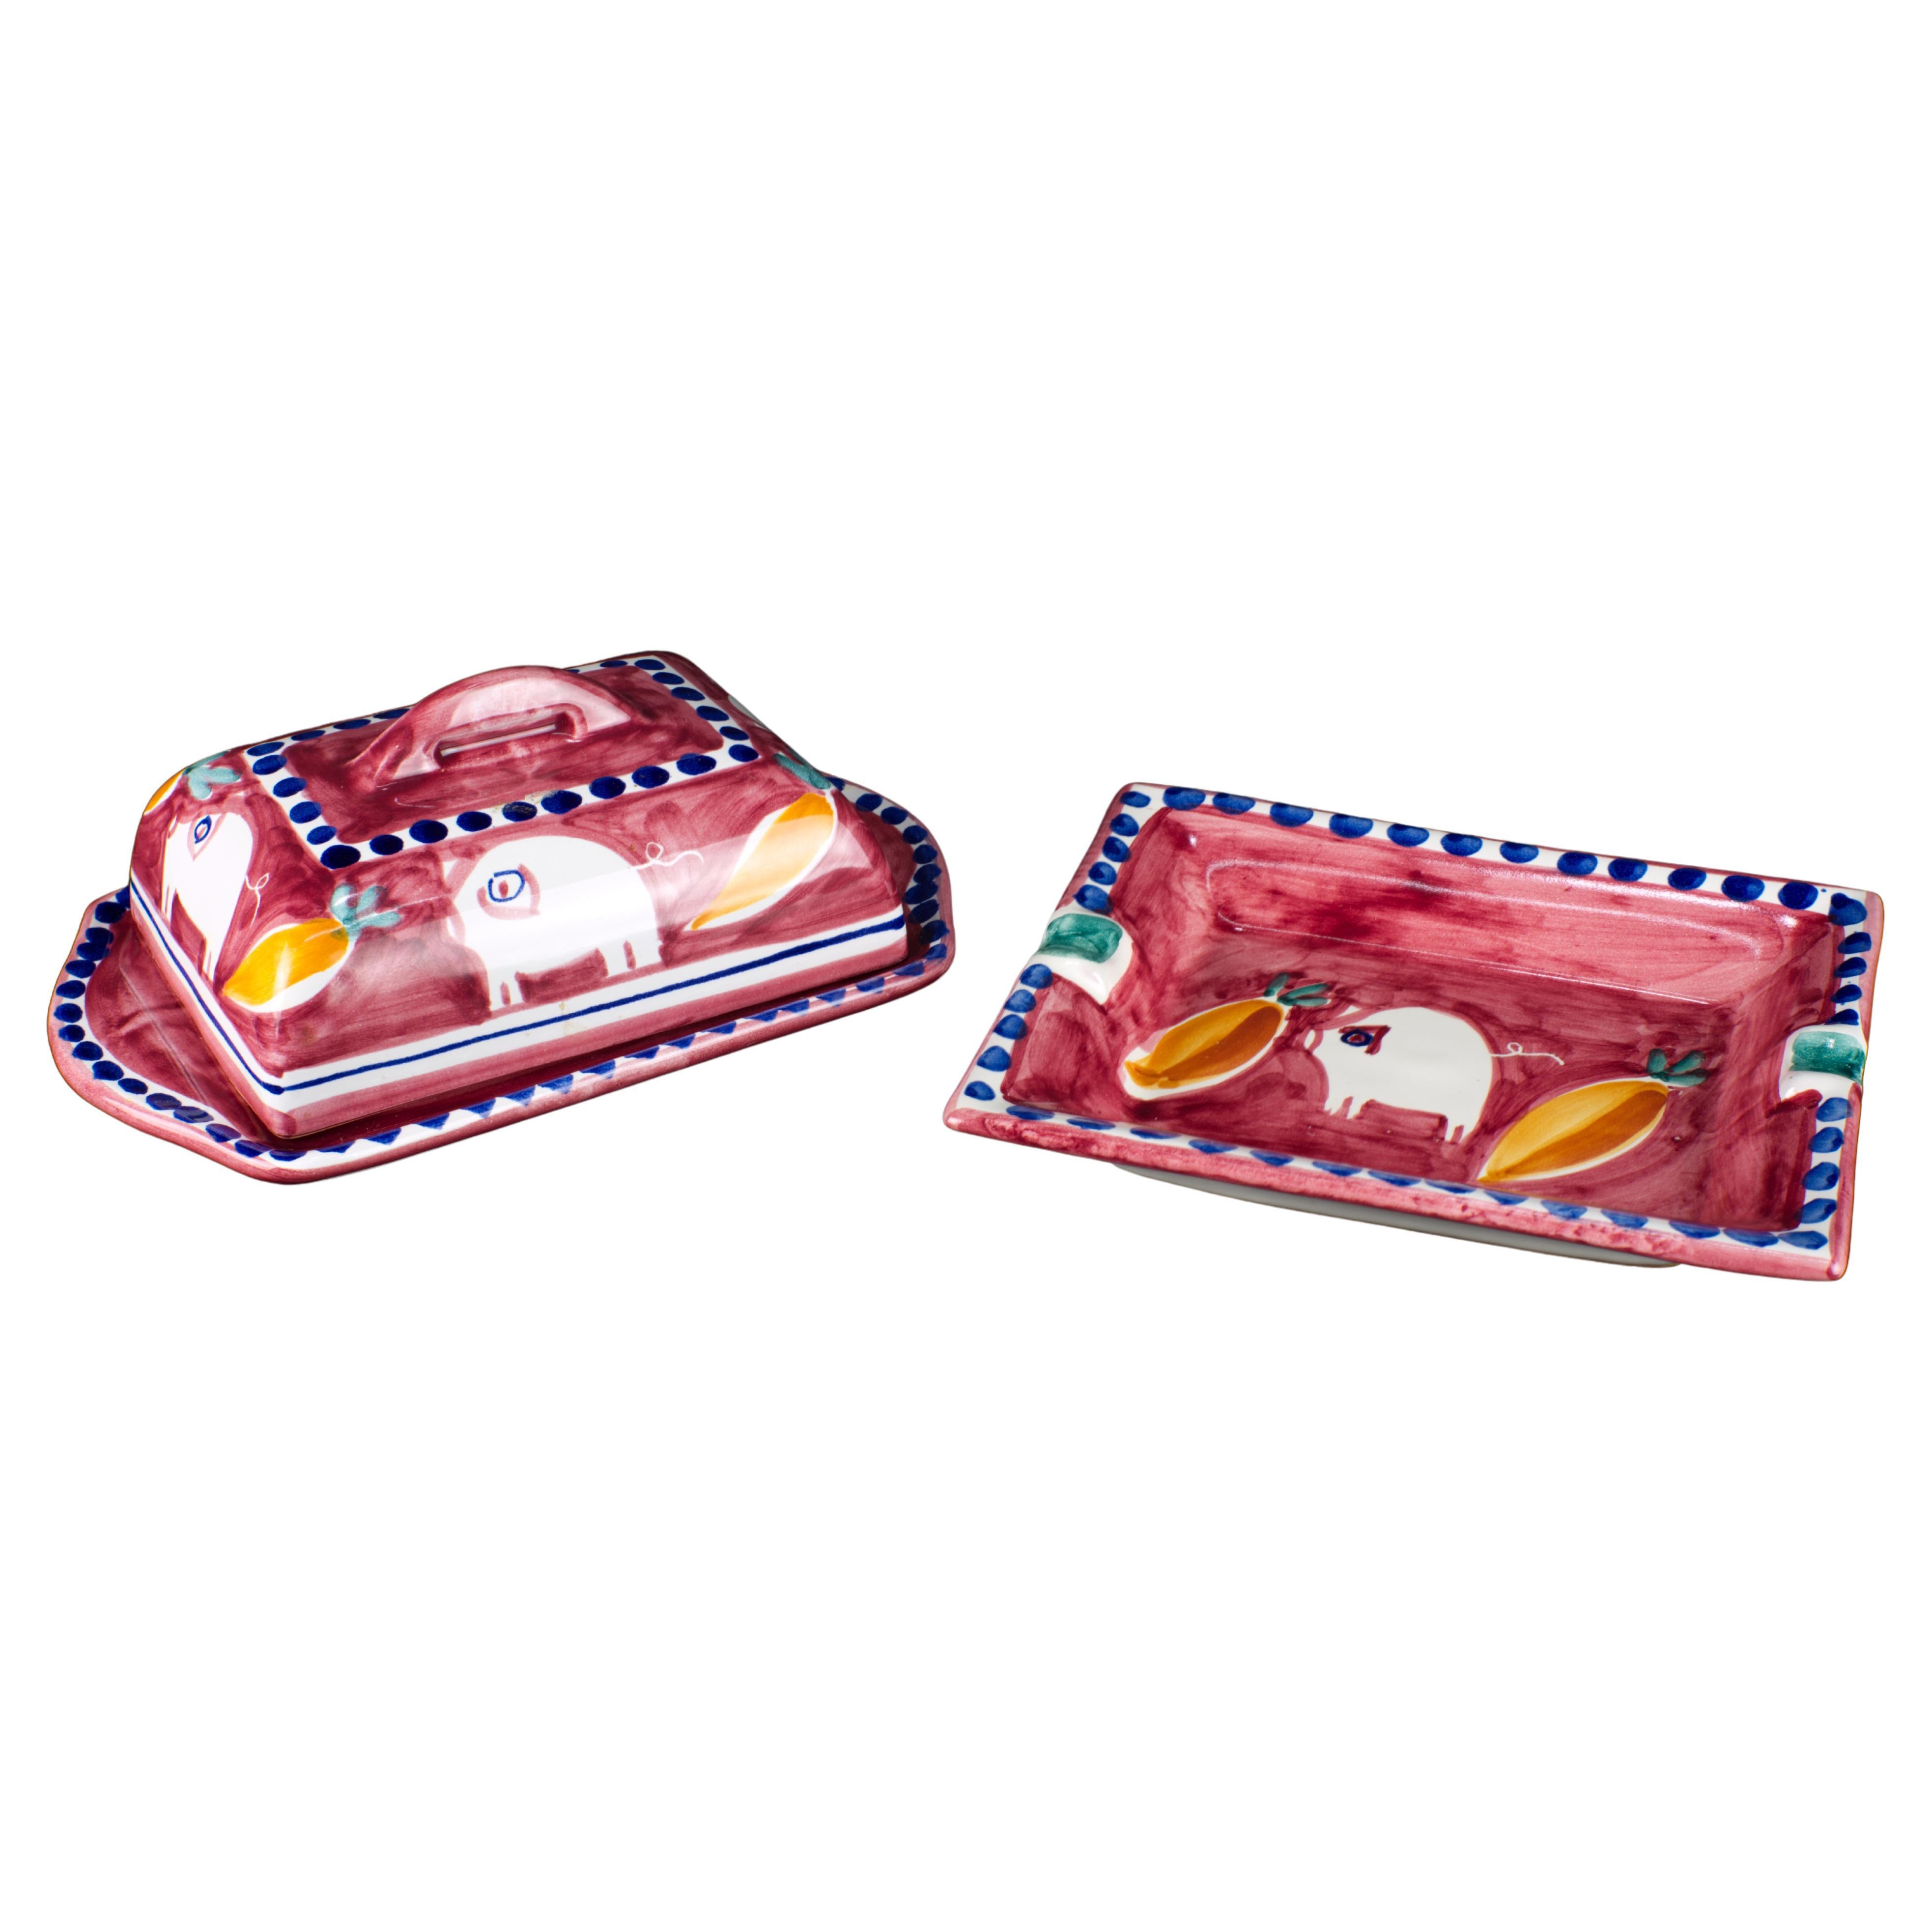 Solimene Vietri Decoro Campagna Porco Butter Dish and Tray Set, Italy For Sale